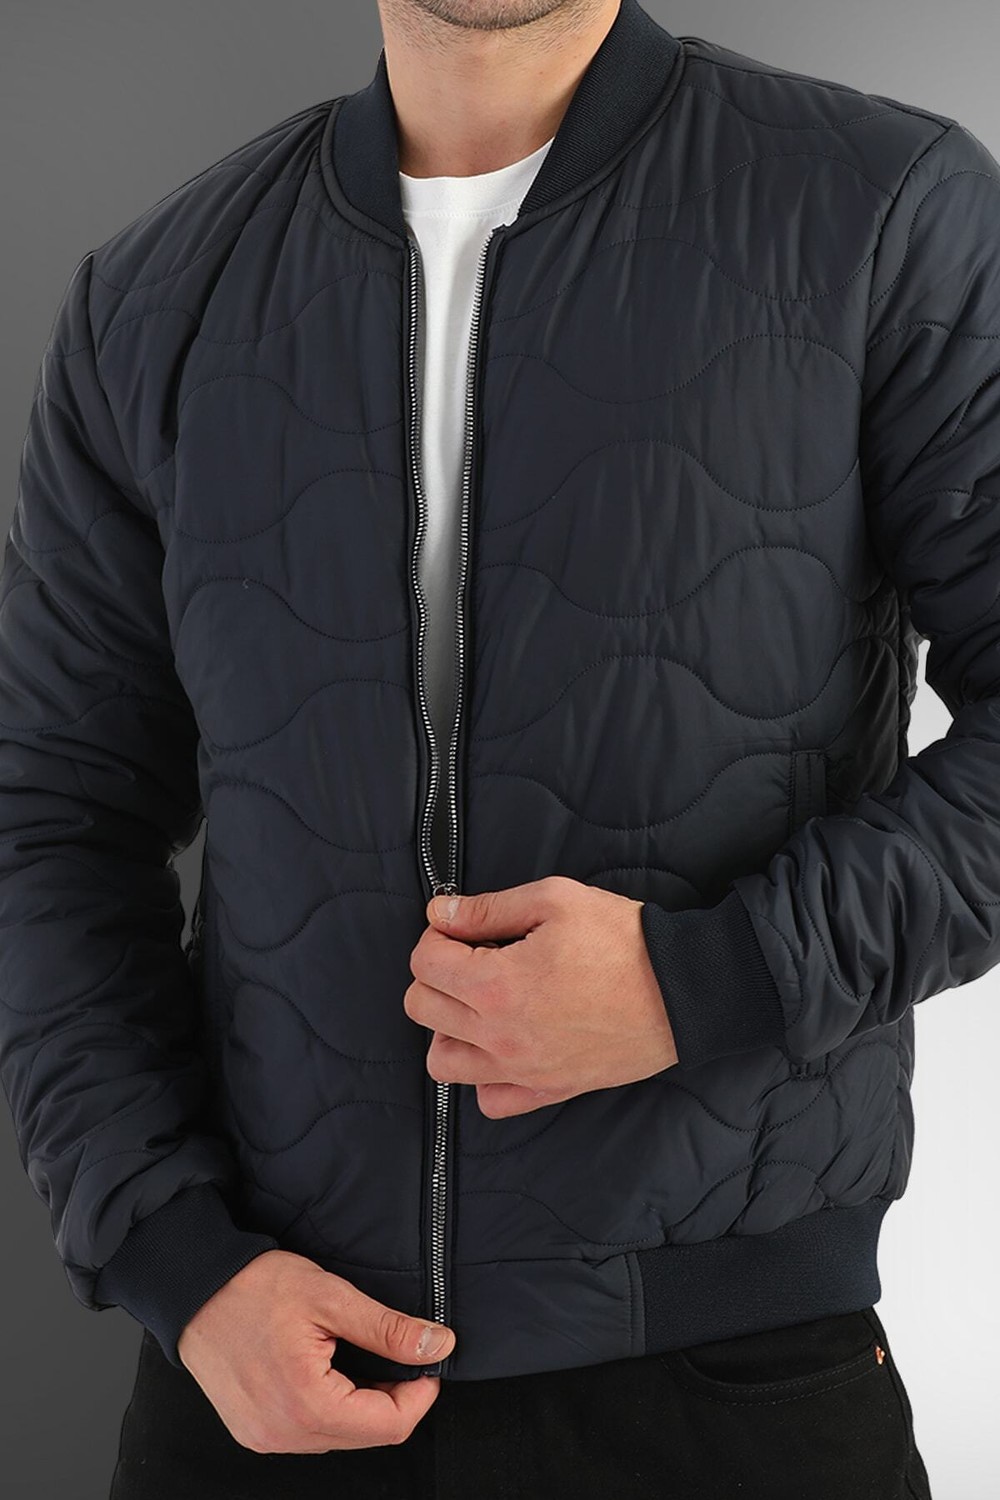 D1fference Men's Navy Blue Water And Windproof Quilted Patterned Winter Coat.